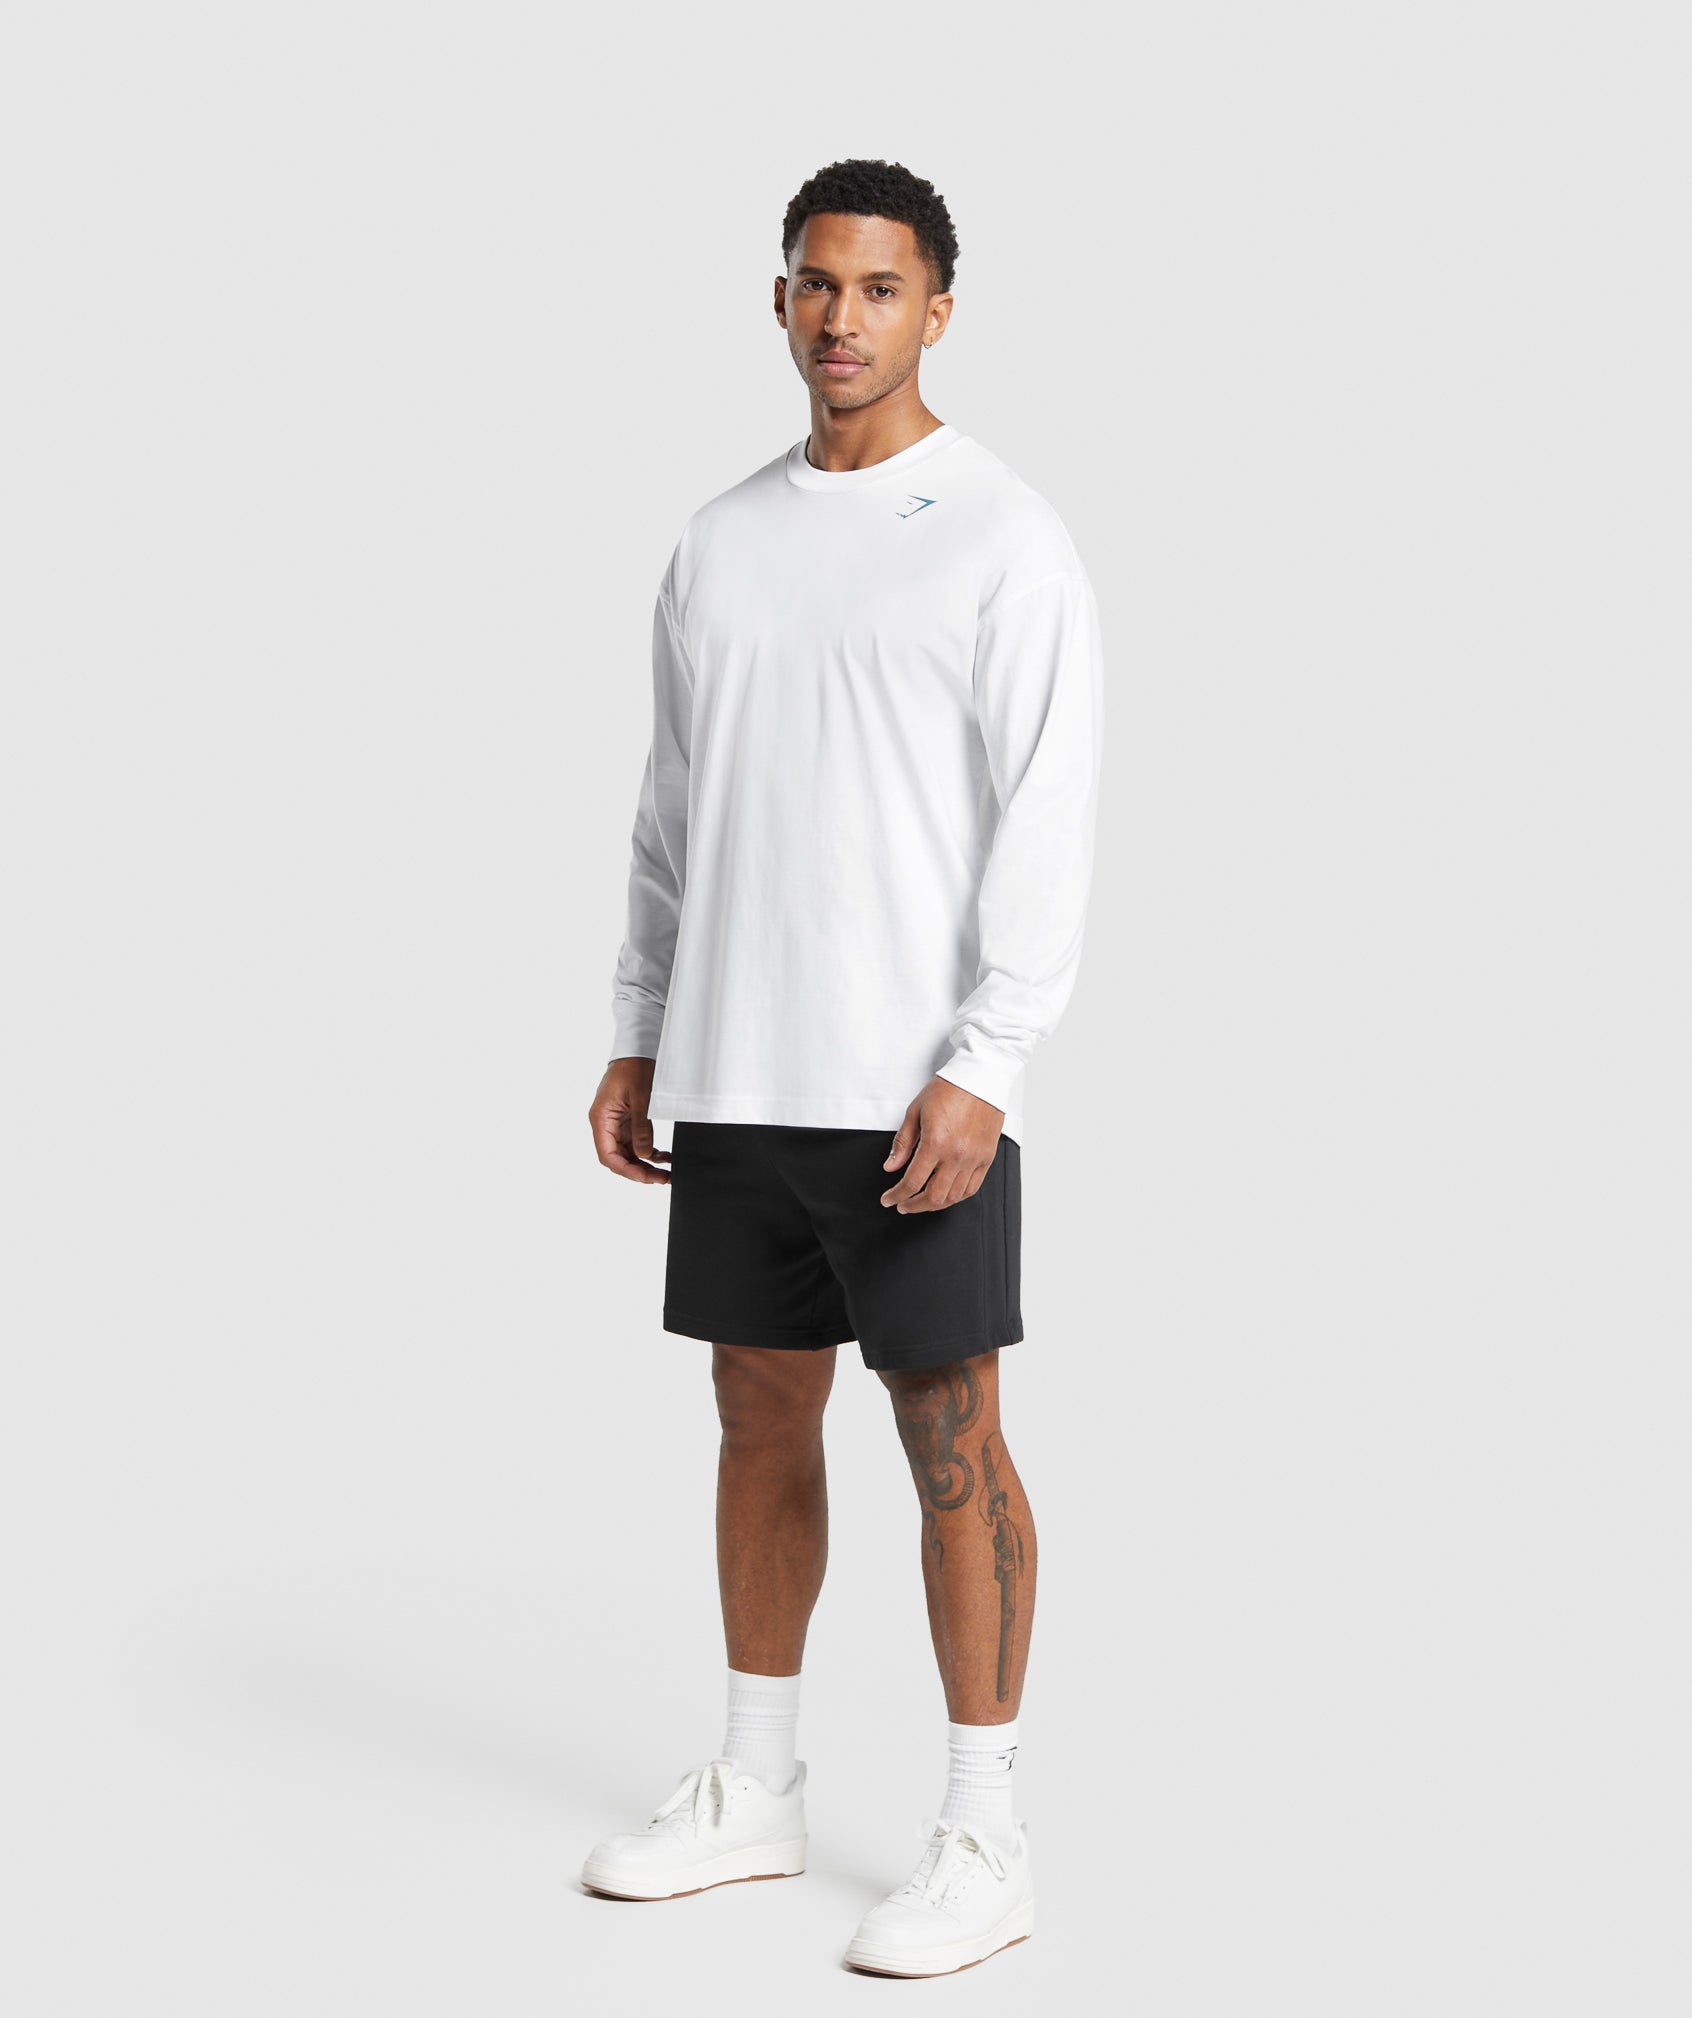 Western Long Sleeve T-Shirt in White - view 4